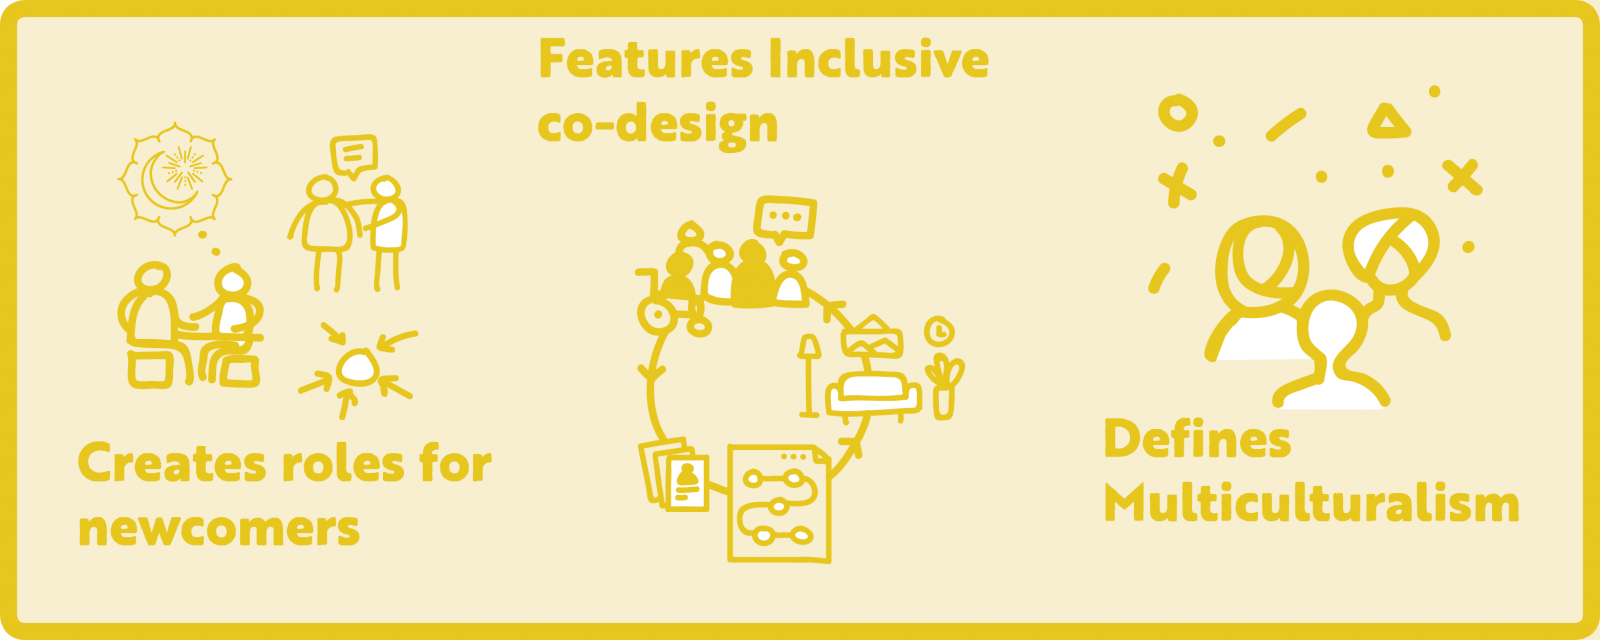 Creates Roles for newcomers – Features inclusive co-design – defines multiculturalism